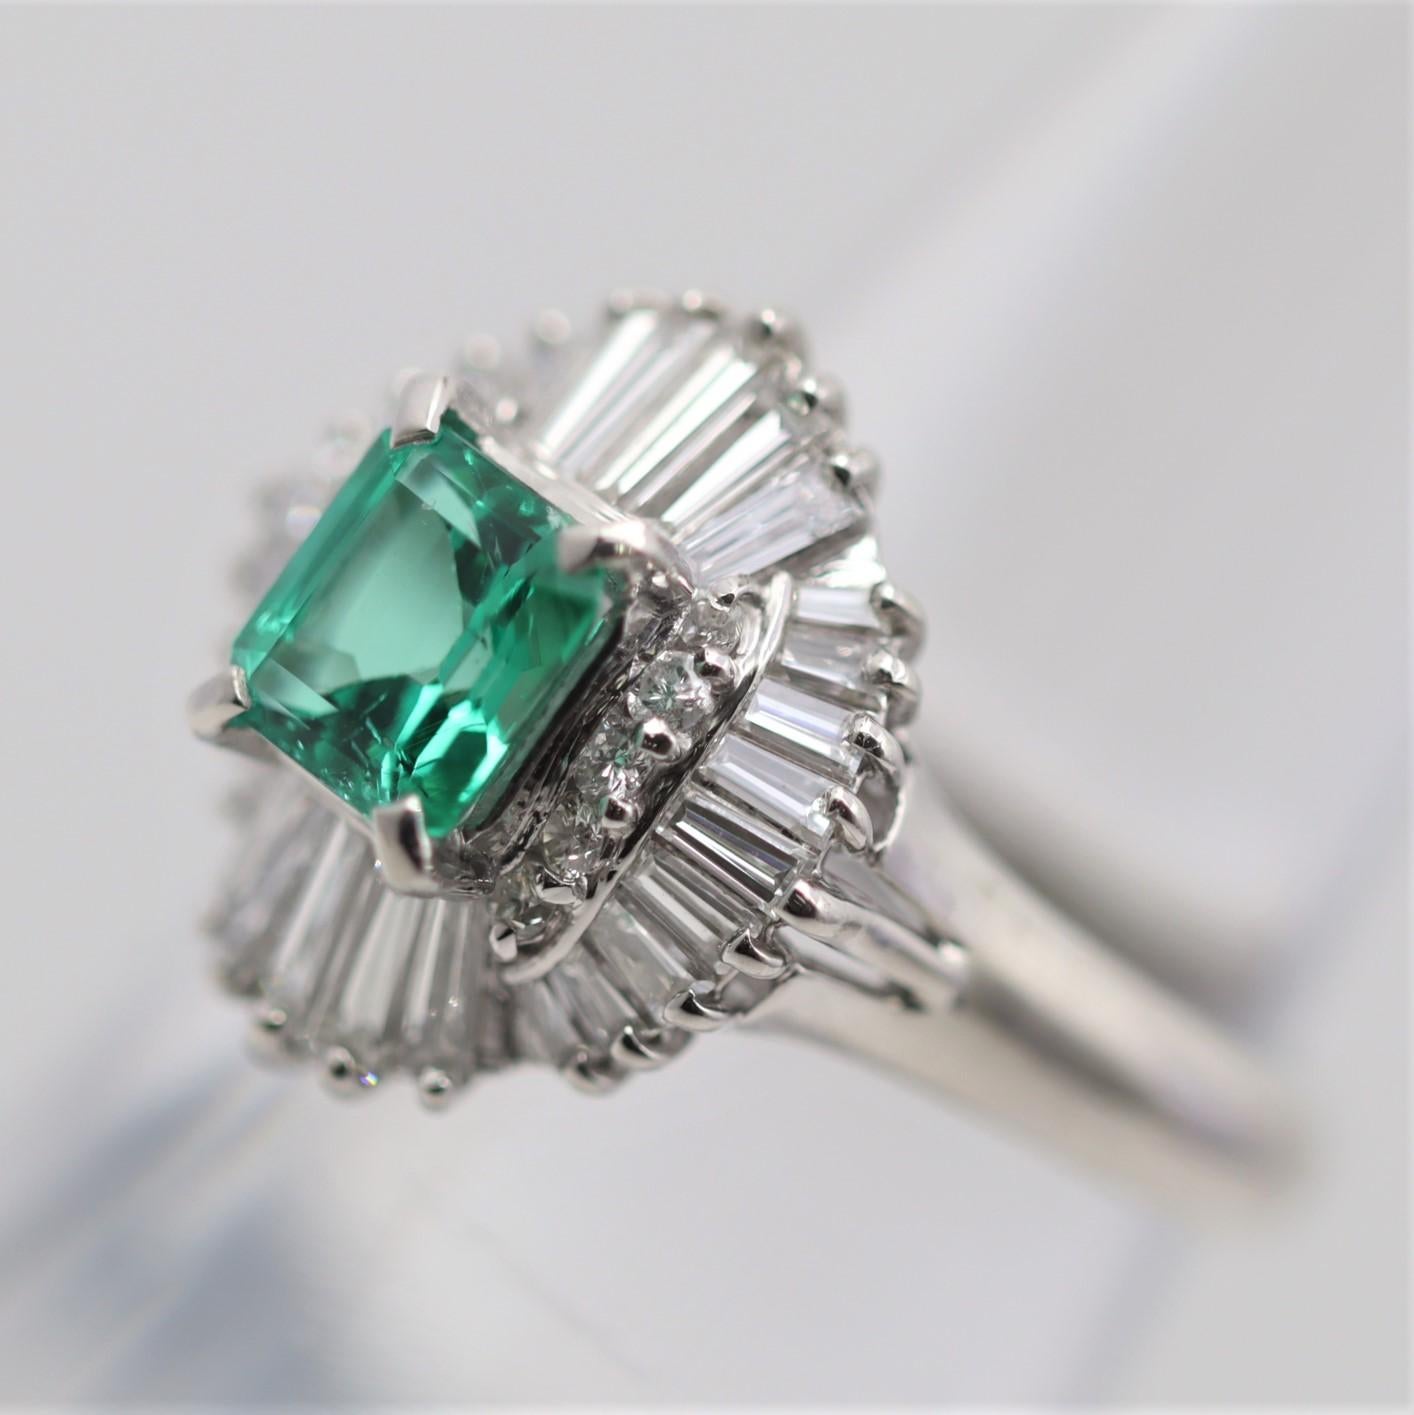 A simple yet elegant platinum ring featuring a 0.86 carats emerald-cut emerald with a vibrant bright green color. It is accented by 0.99 carats of bright white diamonds surrounding the emerald in a stylish pattern. Hand-fabricated in platinum and